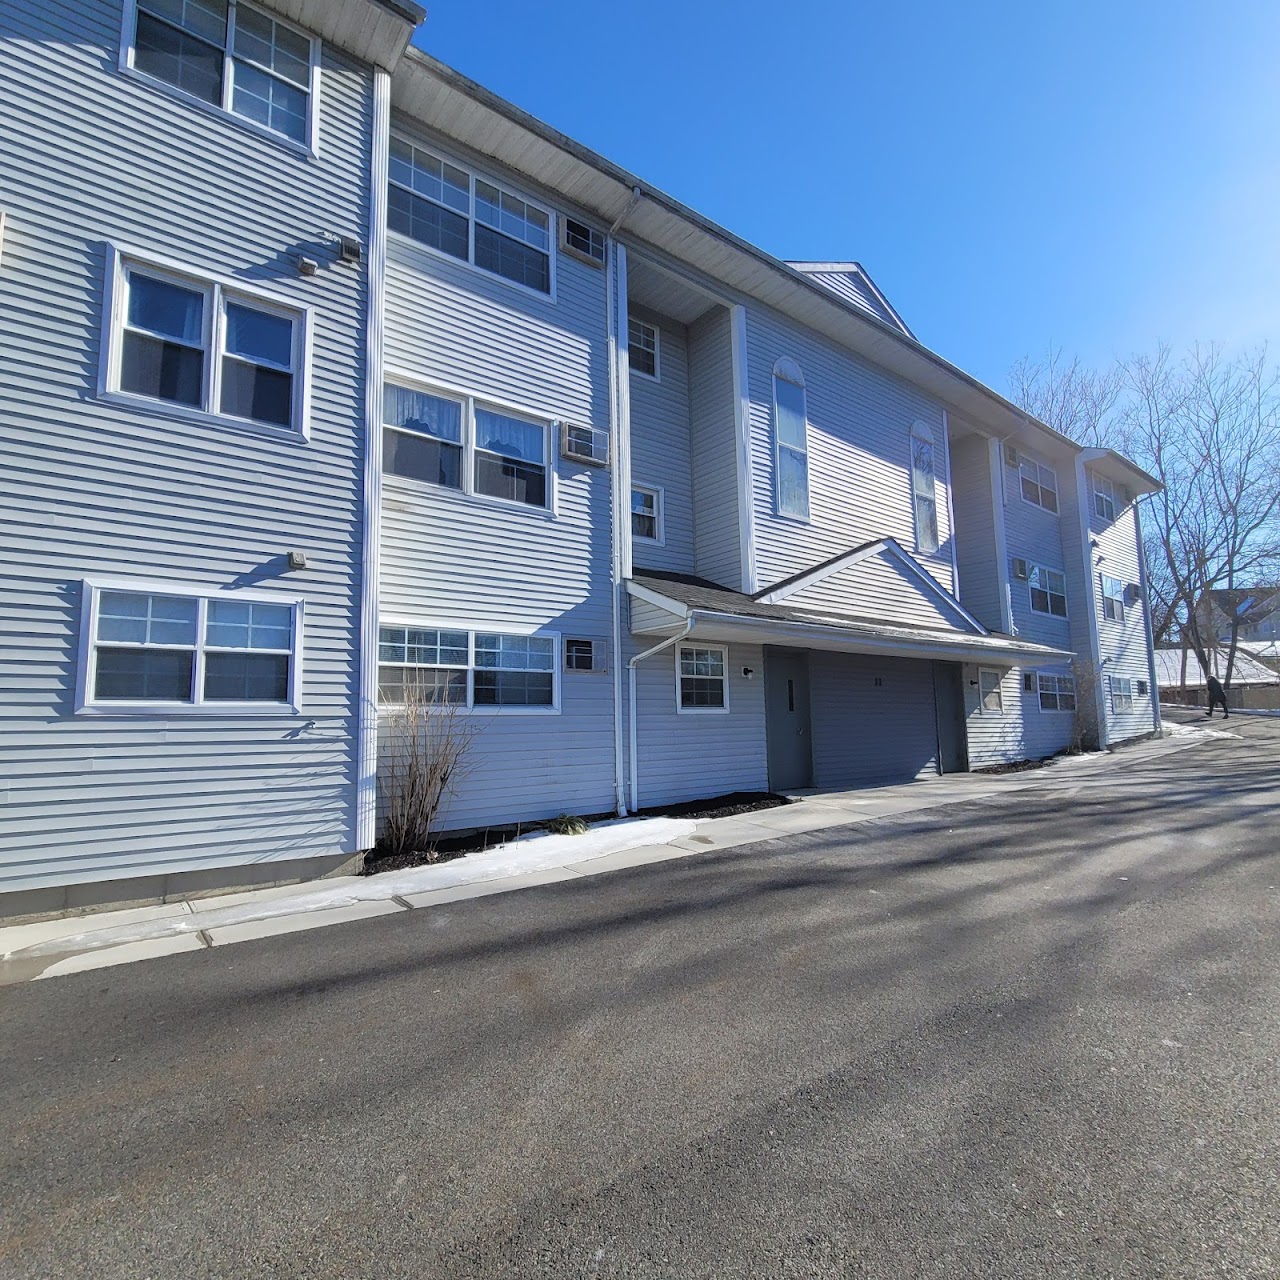 Photo of WALDEN VIEW APTS. Affordable housing located at 33 OAK ST WALDEN, NY 12586